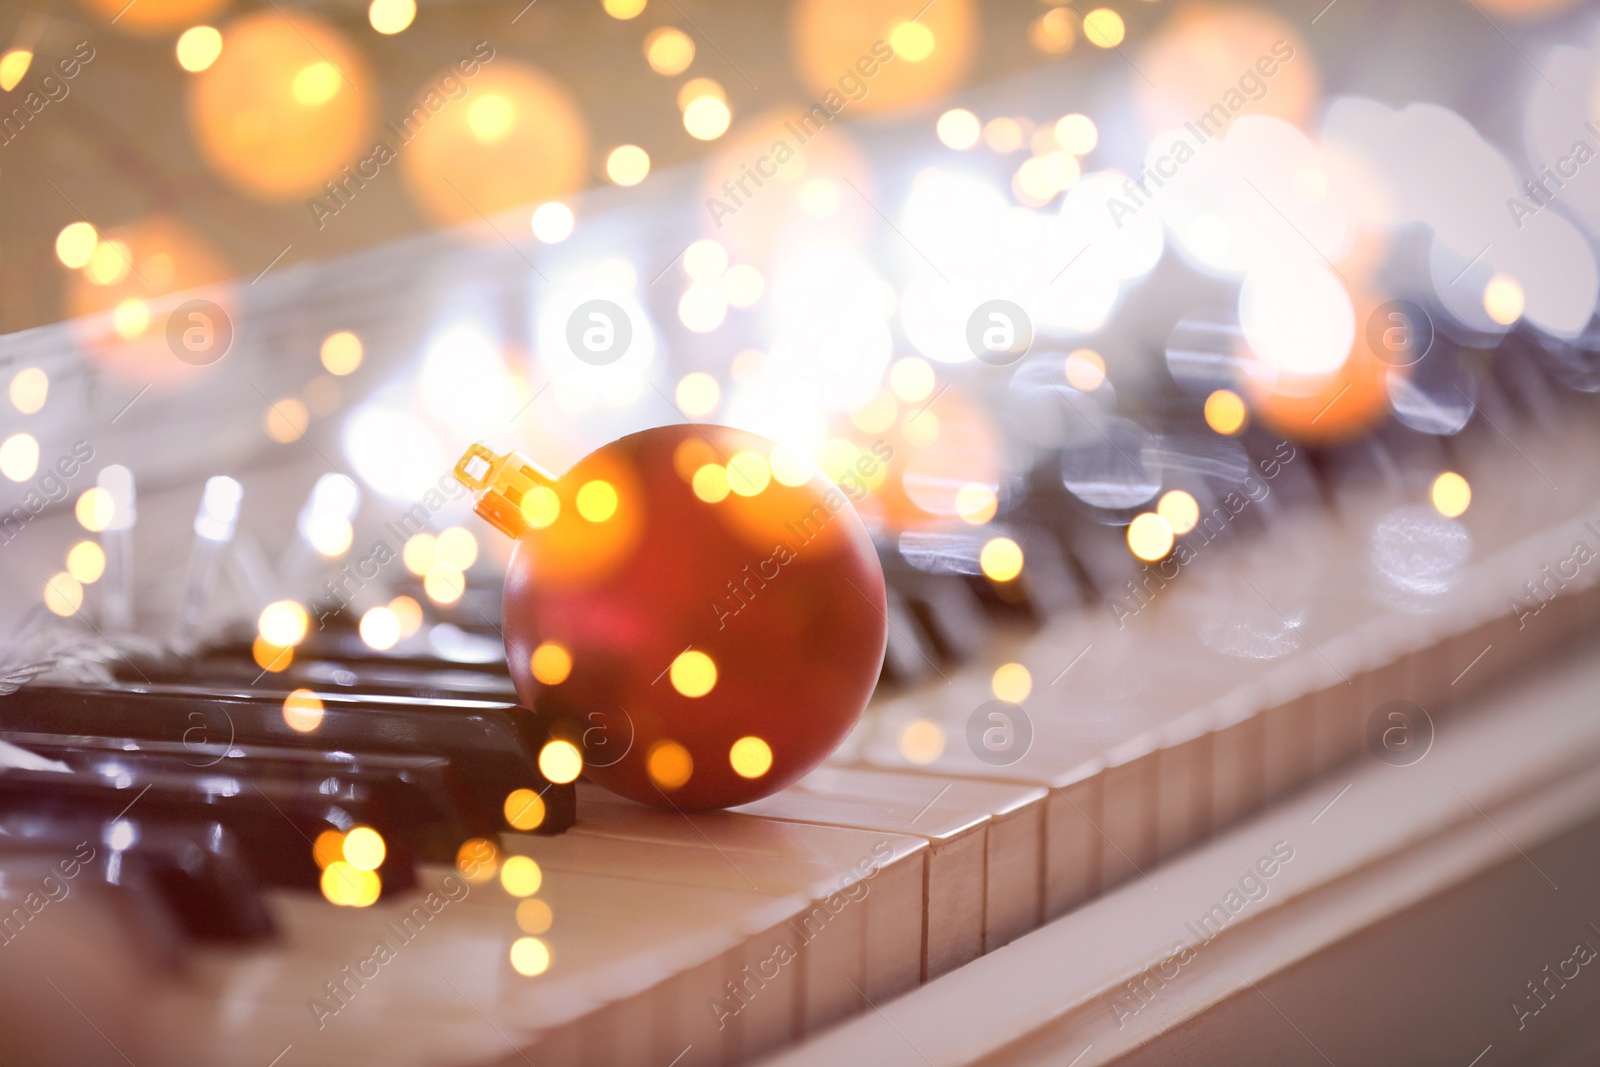 Image of Christmas and New Year music. Piano with festive ball, bokeh effect